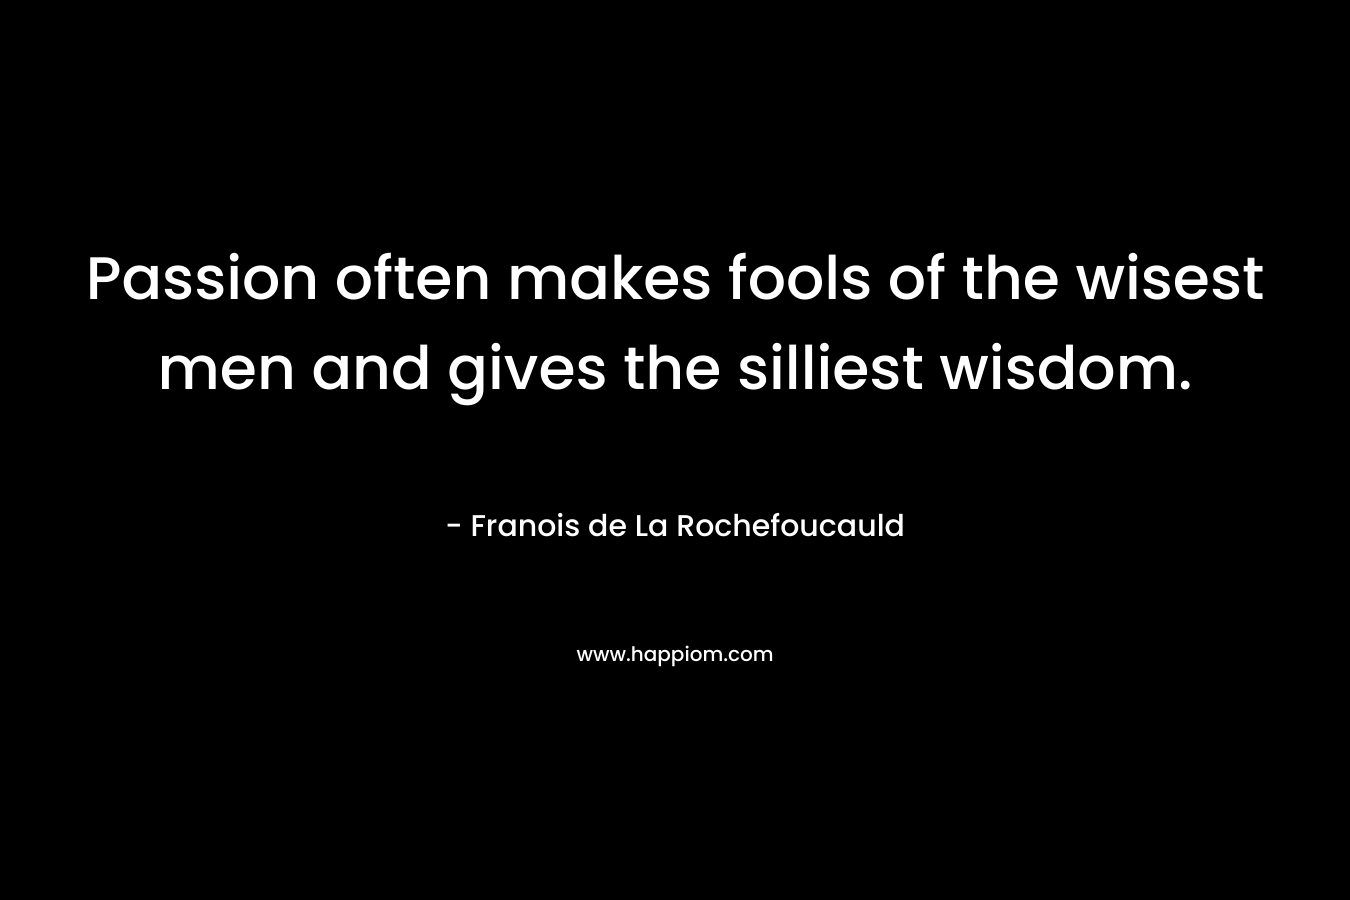 Passion often makes fools of the wisest men and gives the silliest wisdom.